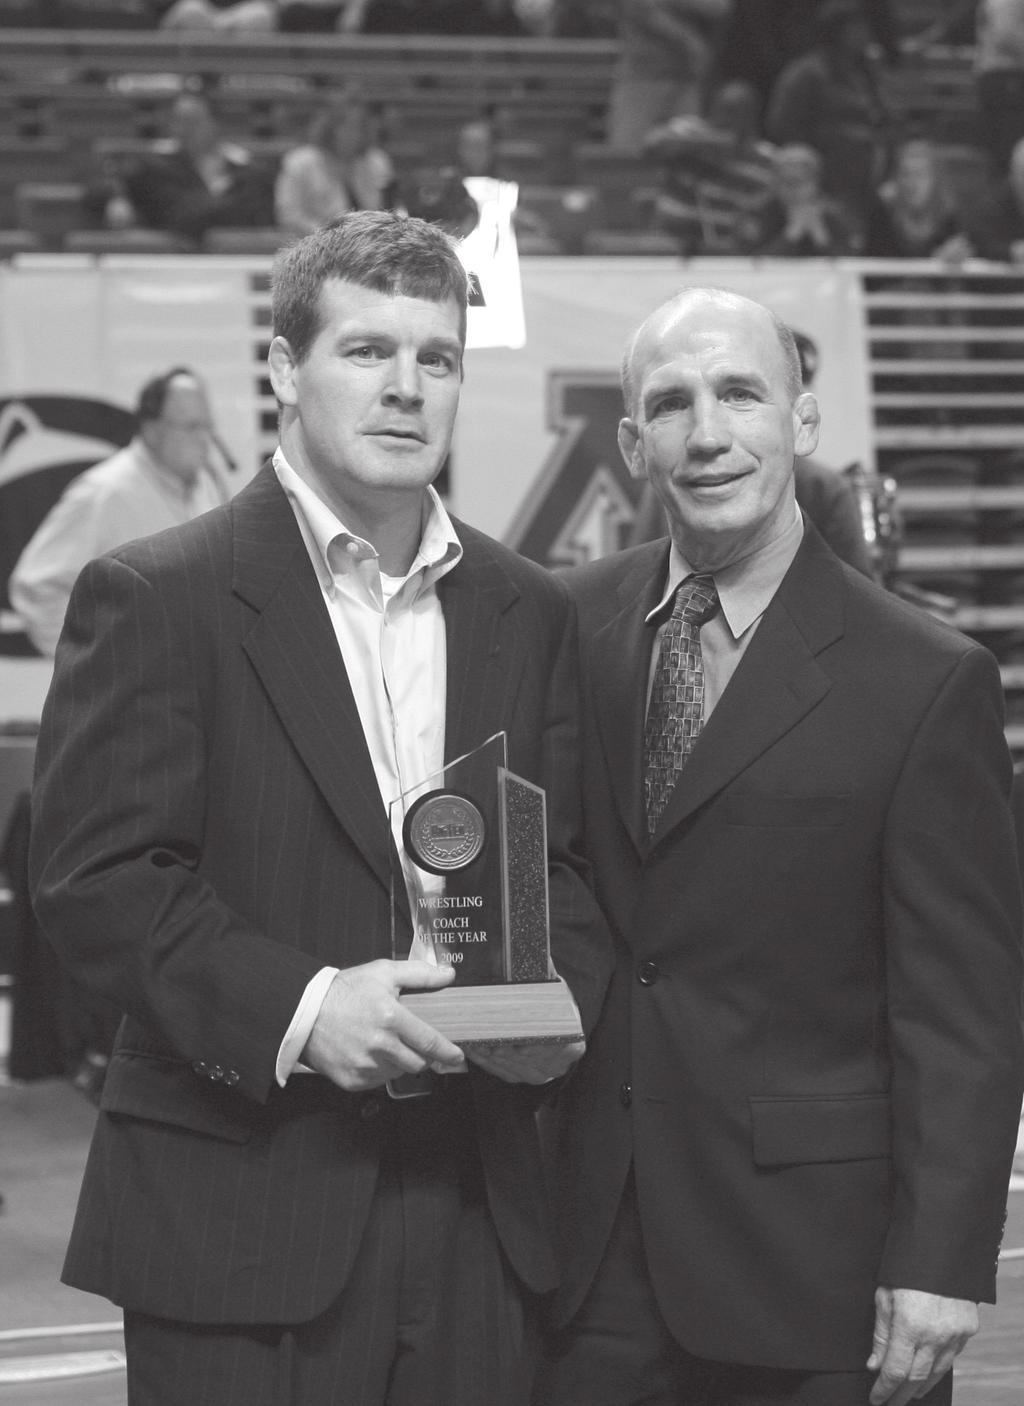 Head Coach Tom Brands As a competitor, Brands won the 1996 Olympic freestyle gold medal at 136.5 pounds in Atlanta, GA.